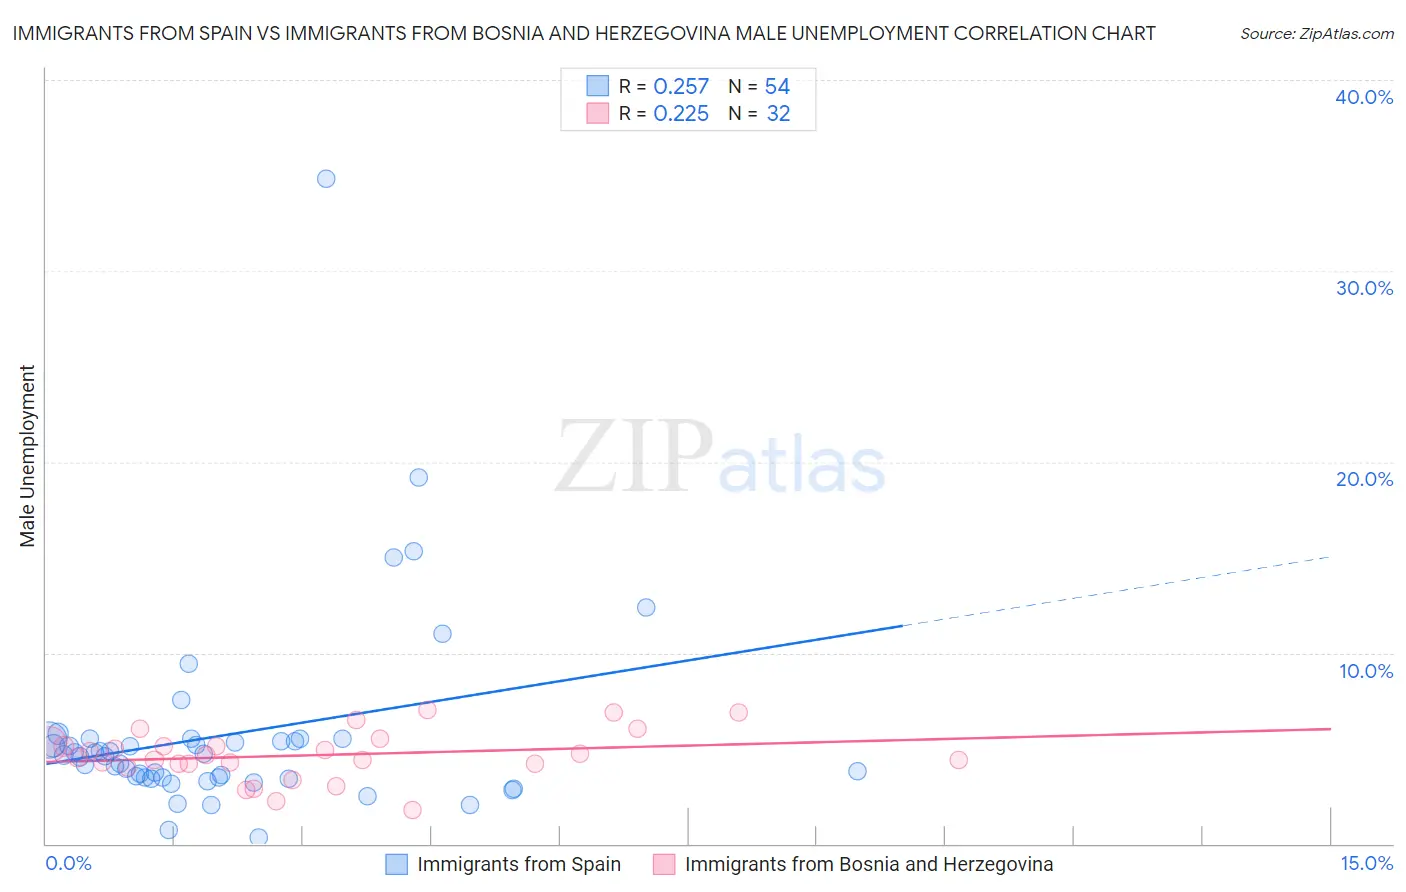 Immigrants from Spain vs Immigrants from Bosnia and Herzegovina Male Unemployment